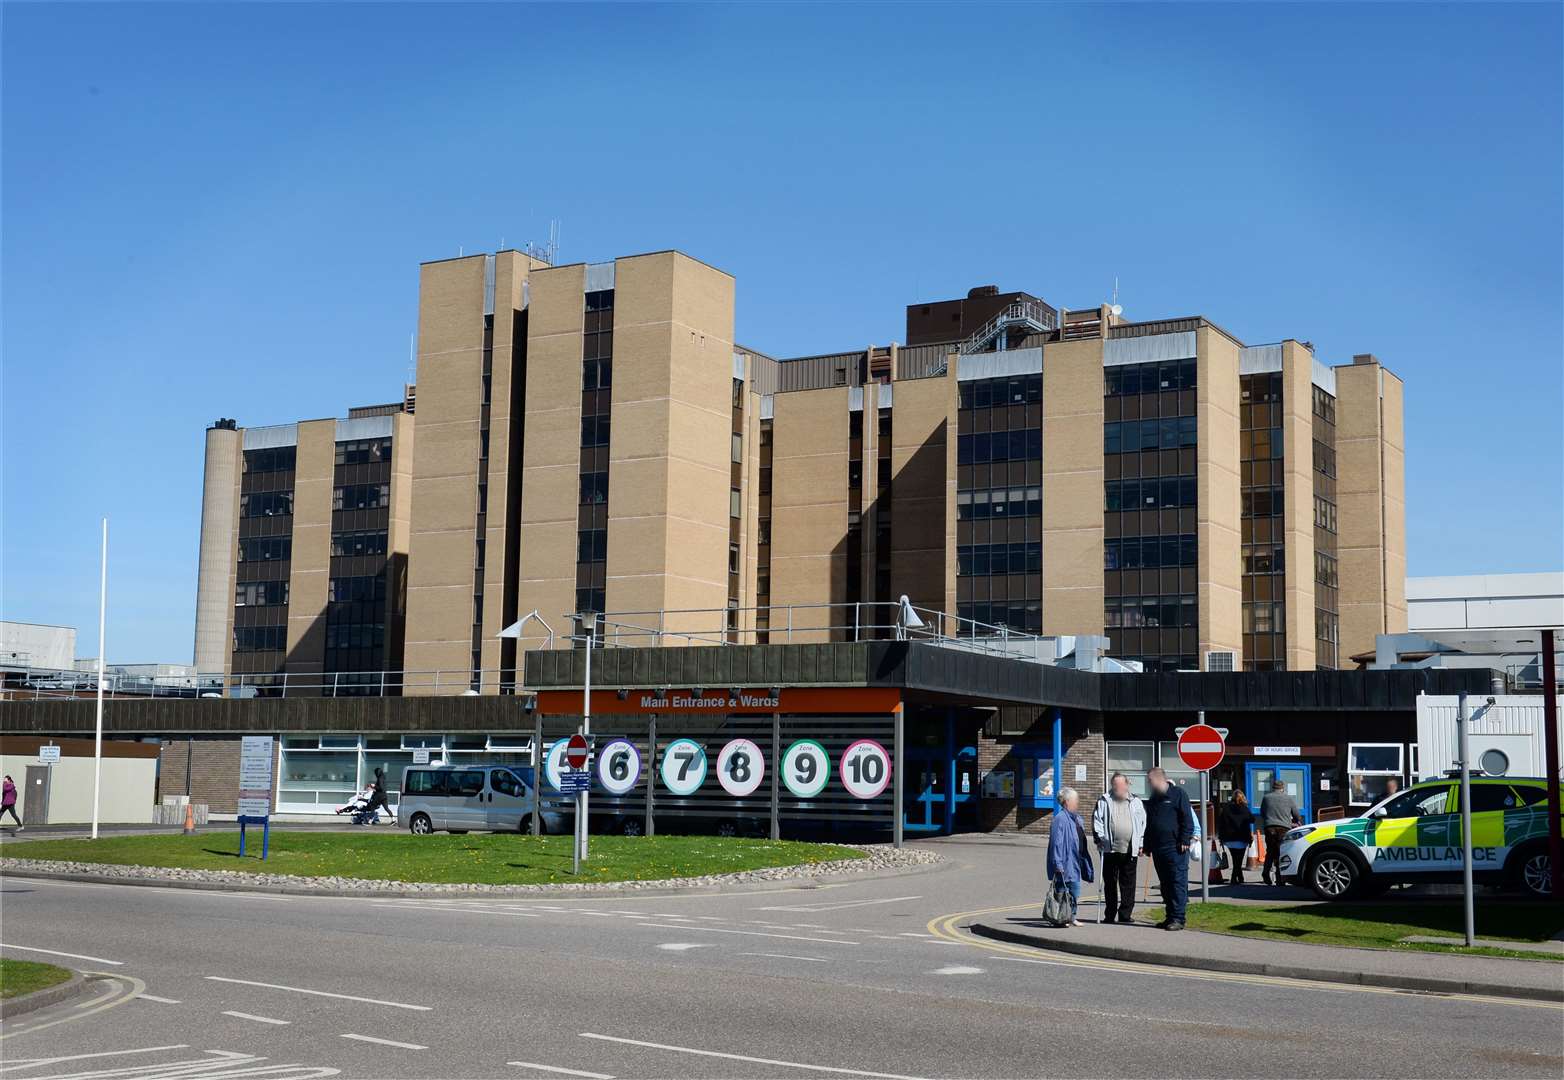 Raigmore has been hit by fears that asbestos could shut parts of the hospital due to asbestos.